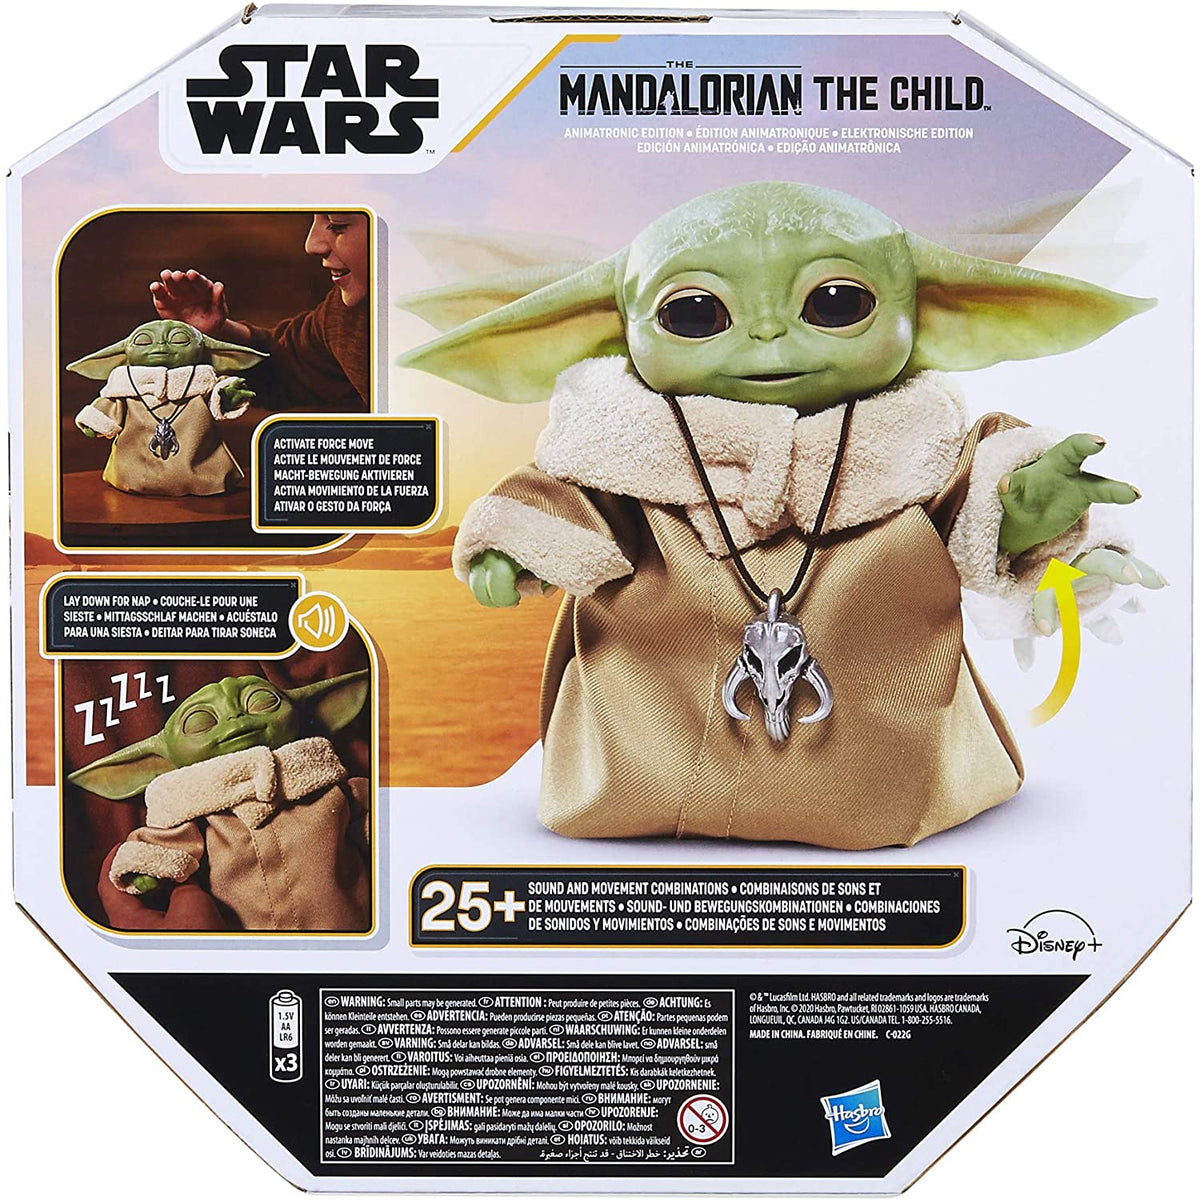 Star Wars The Child Animatronic Edition 7.2-Inch-Tall Toy by Hasbro with Over 25 Sound and Motion Combinations, Toys for Kids Ages 4 and Up